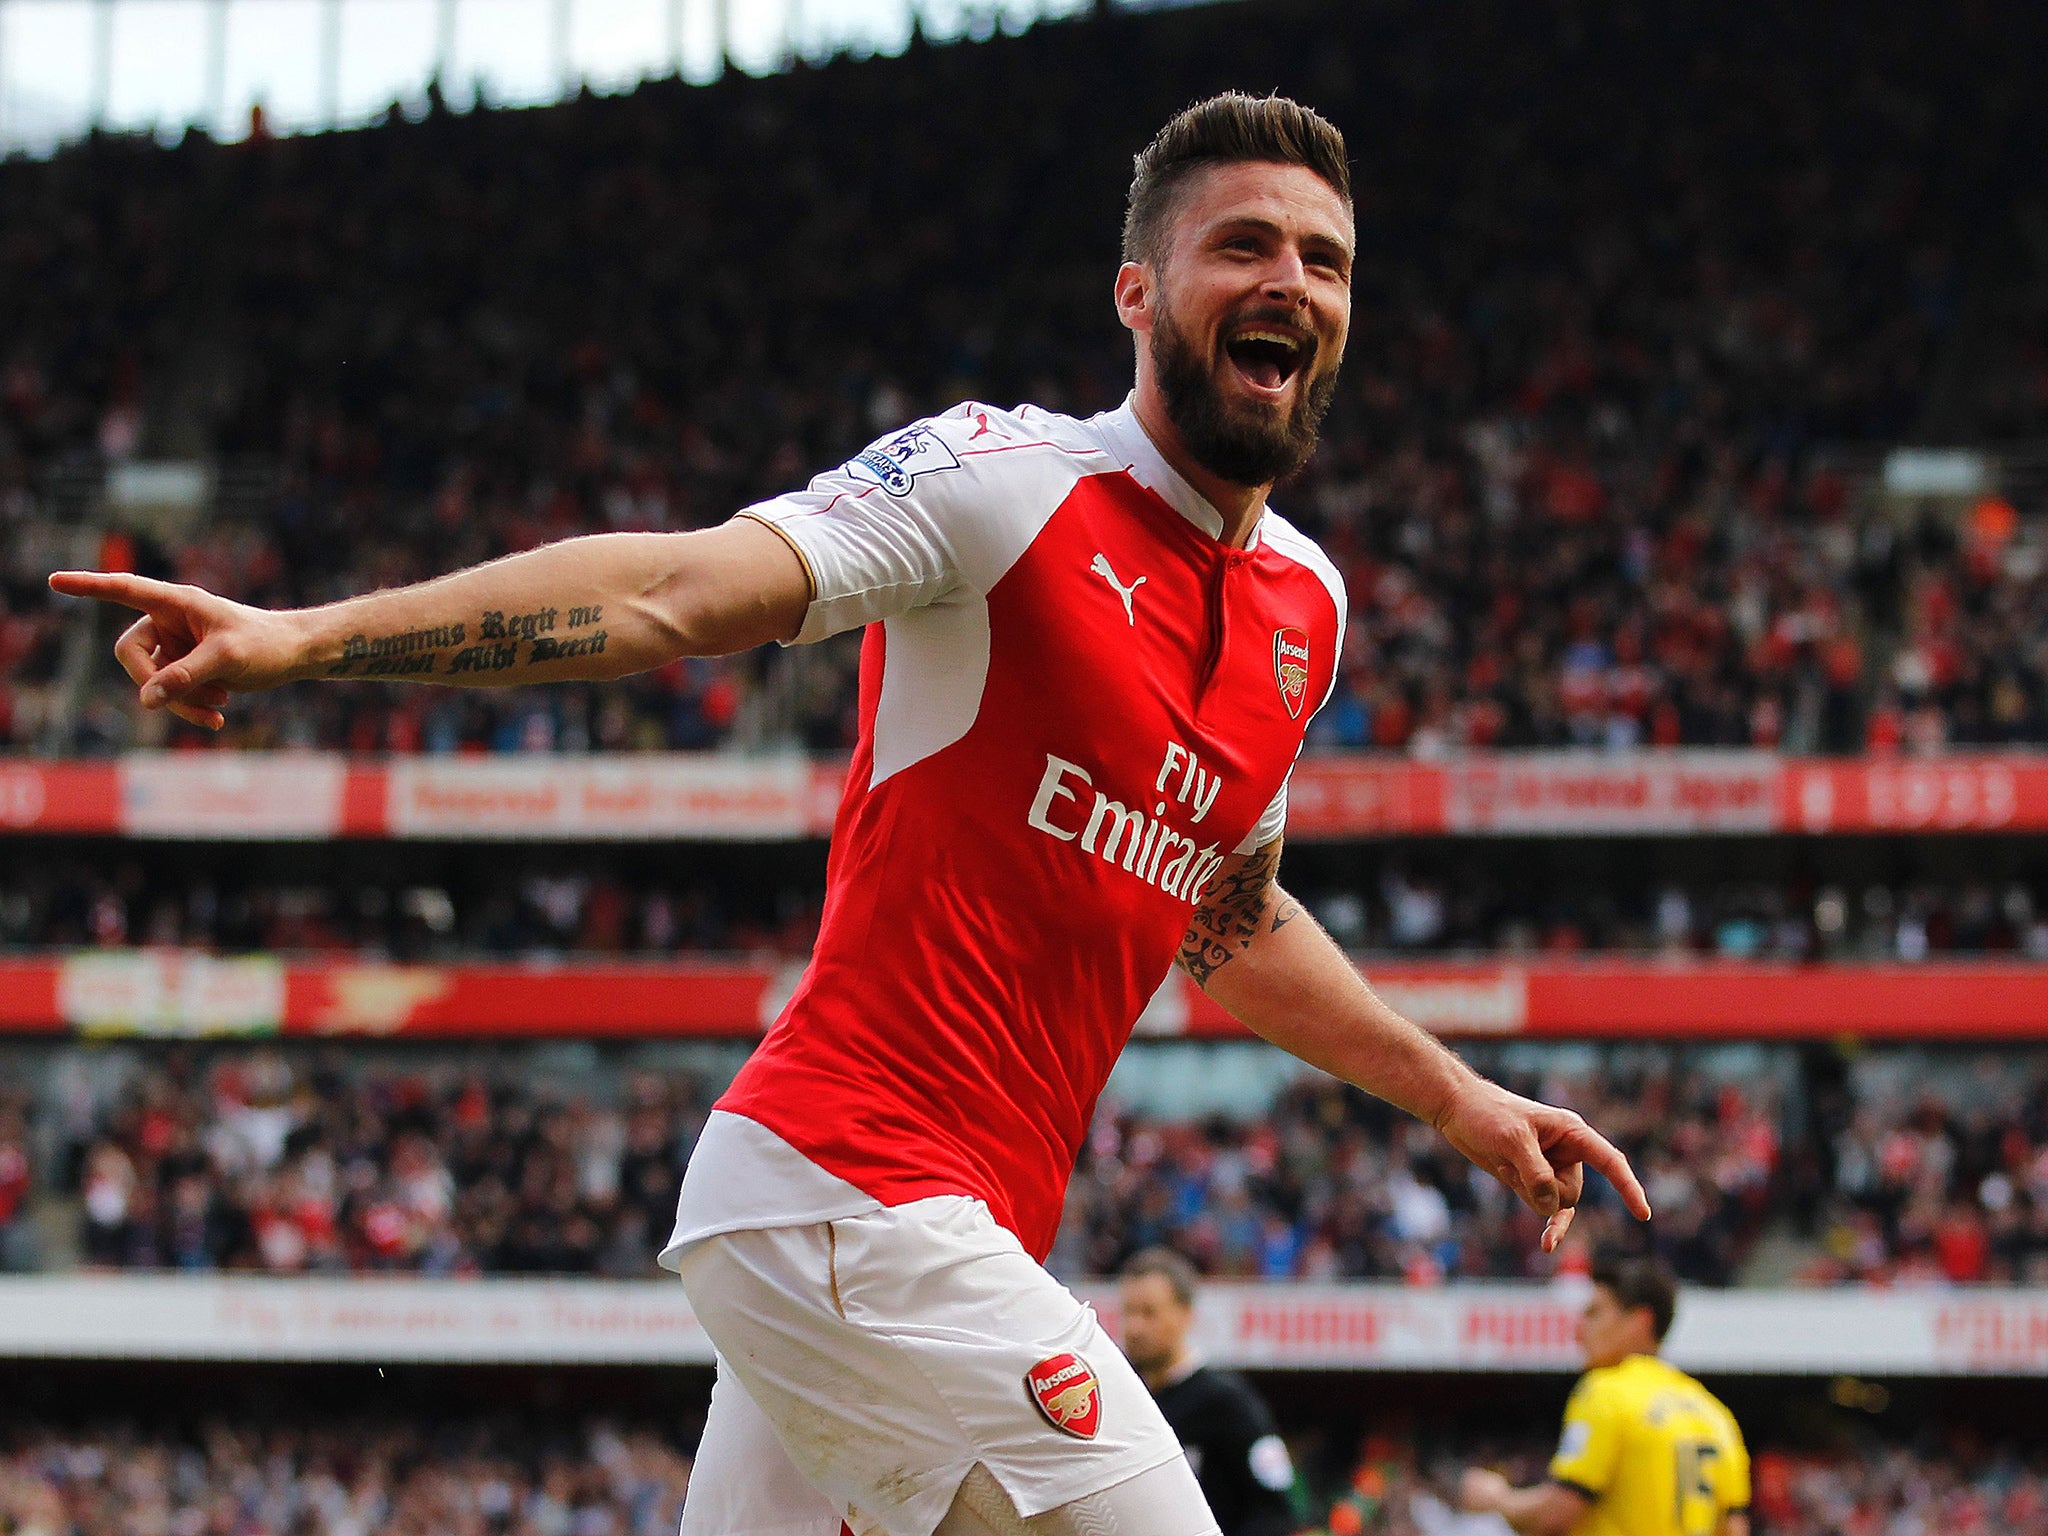 Giroud's hat-trick sealed the win Arsenal needed to supplant their rivals